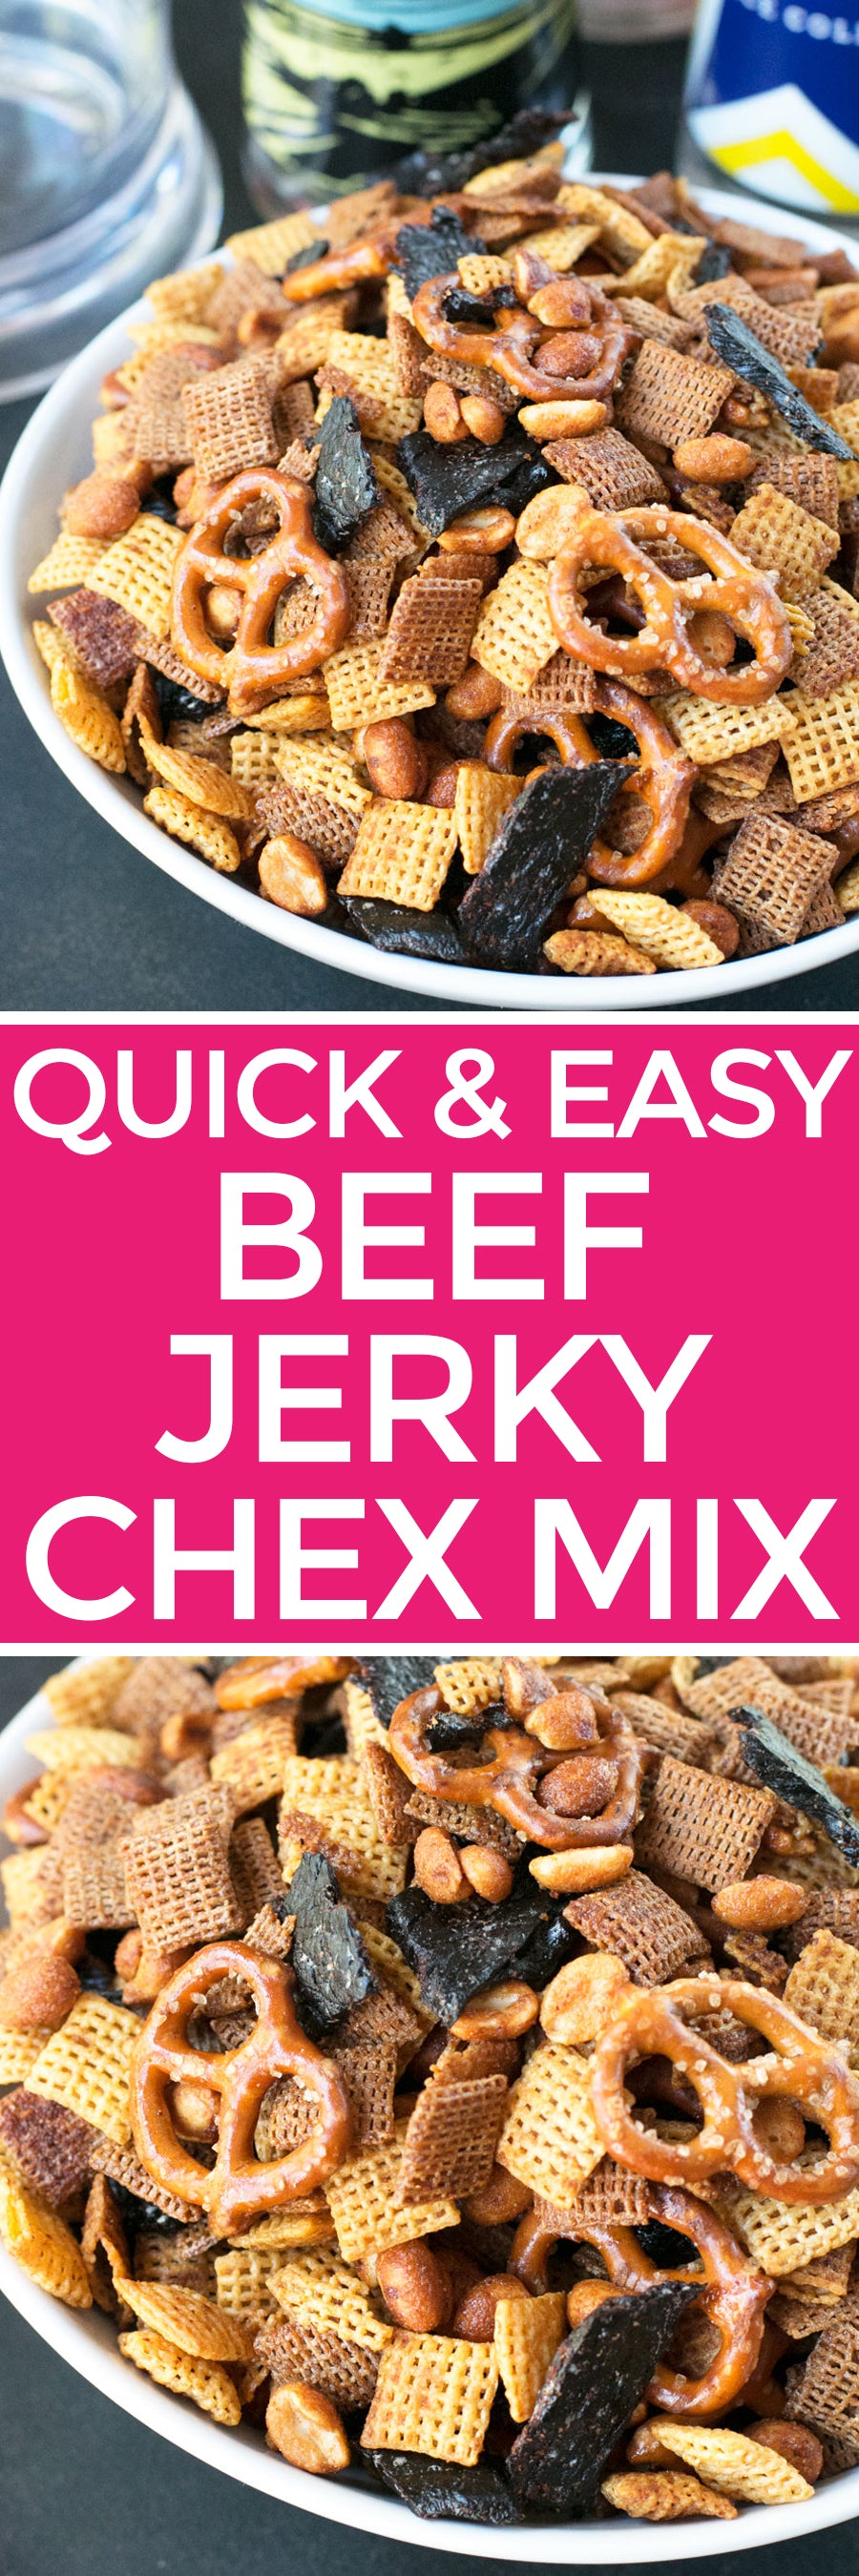 Quick & Easy Beef Jerky Chex Mix | pigofthemonth.com #snack #tailgating